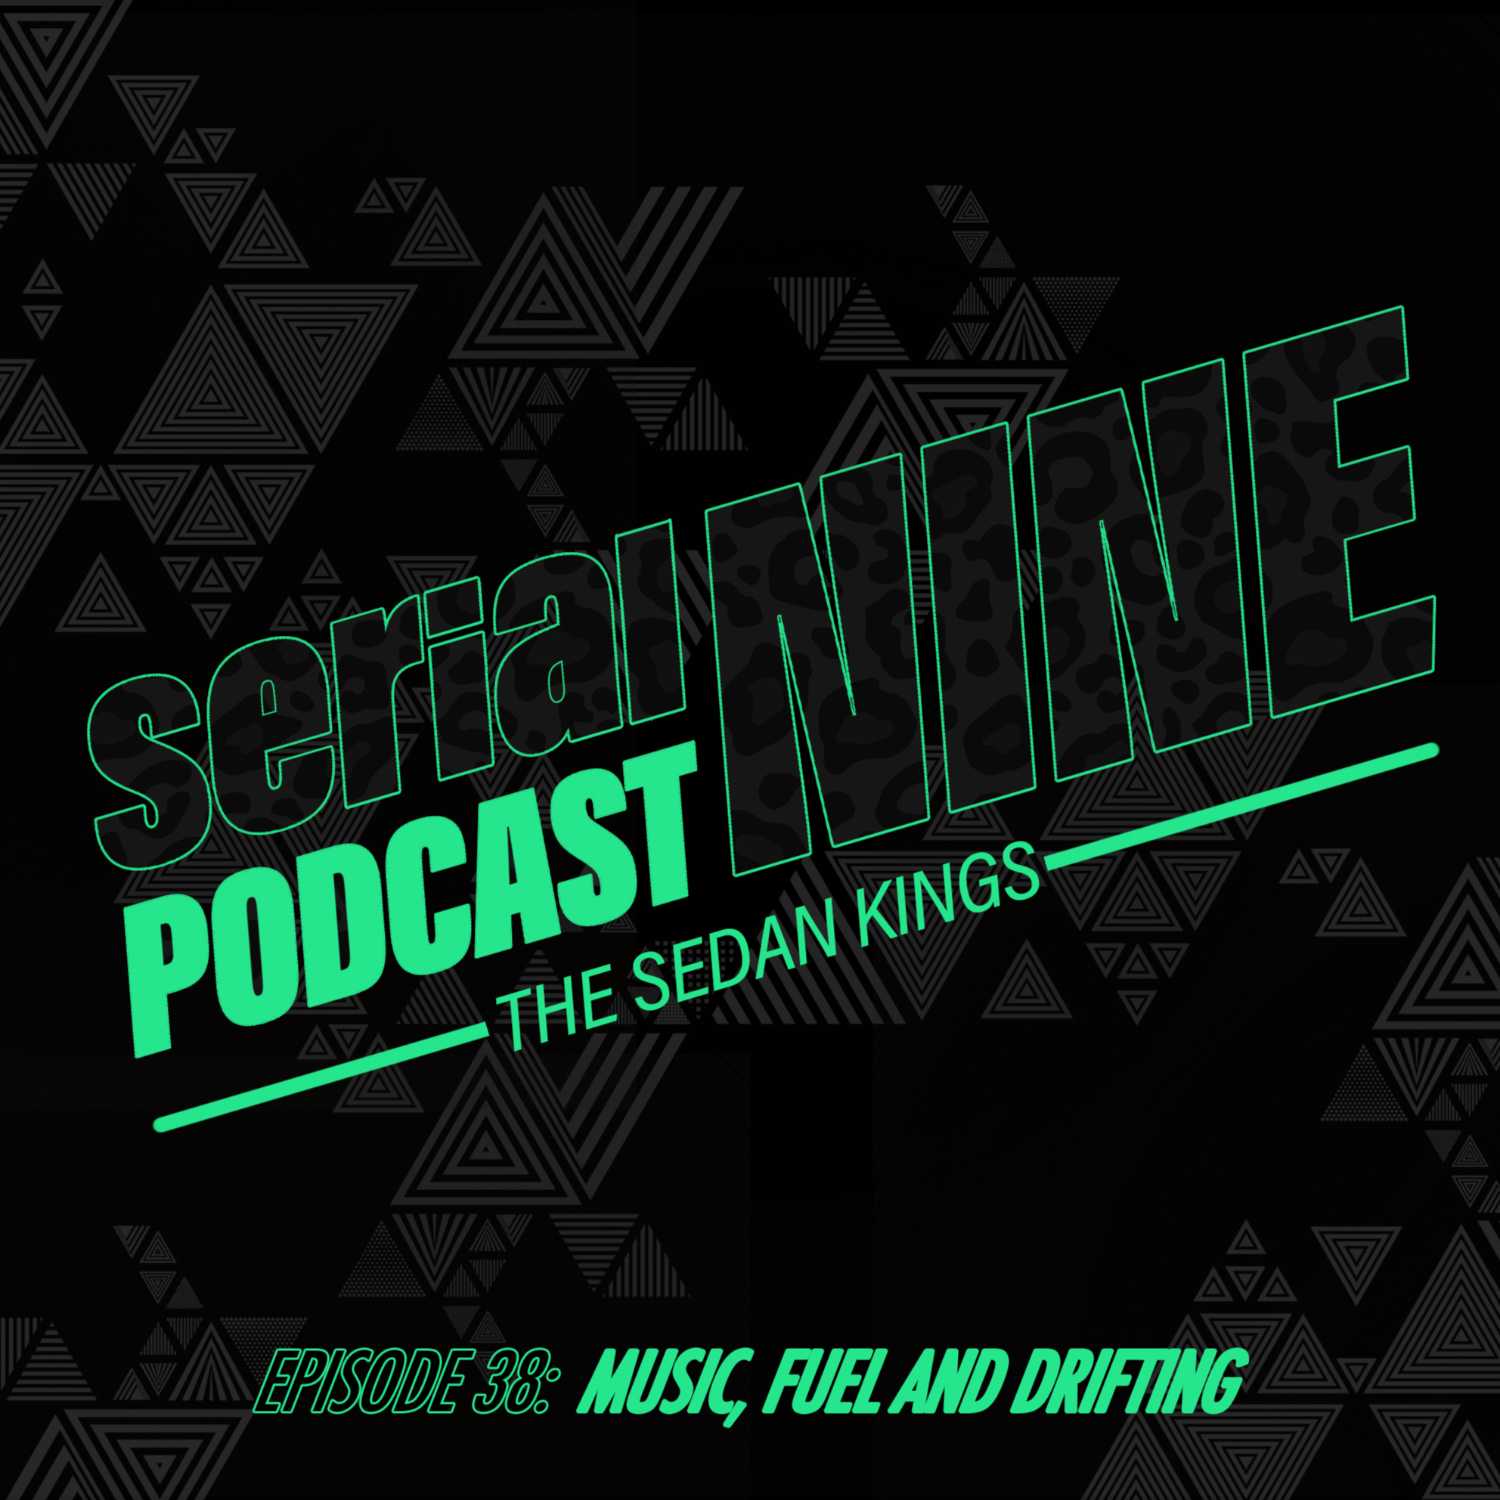 SerialPodcastNine Episode 38 Music, Fuel and Drifting.